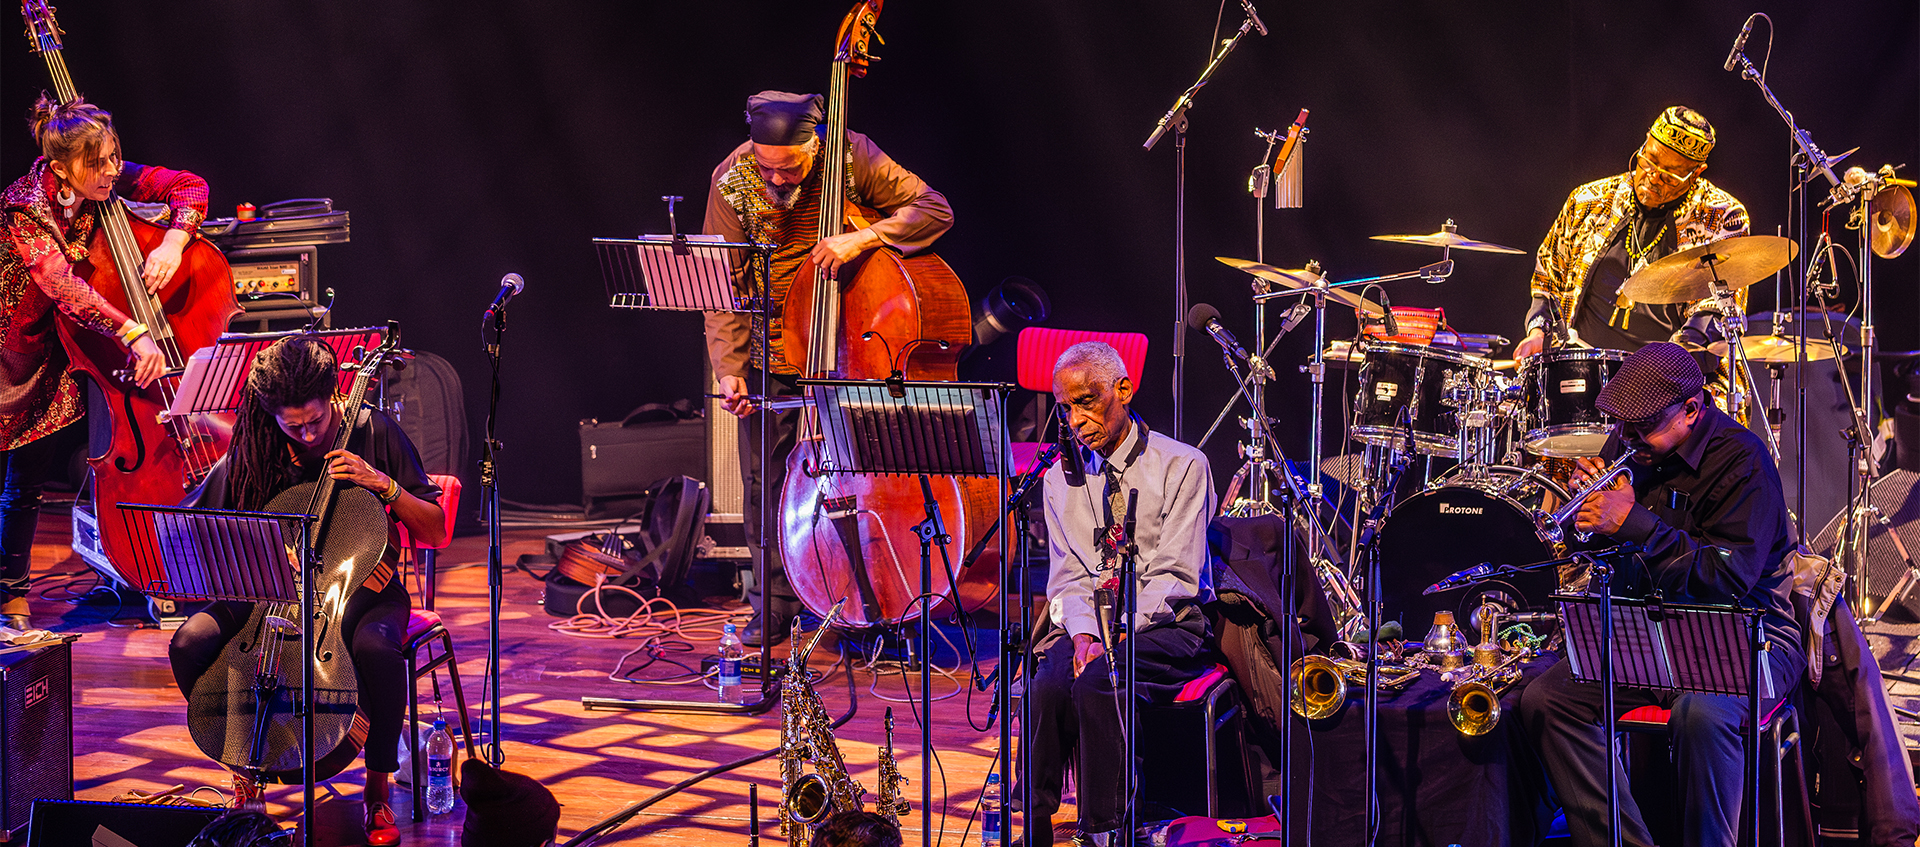 Six jazz musicians perform onstage, playing upright bass, drums, and the trumpet. Roscoe Mitchell is seated center stage, and Don Moye plays drums. 